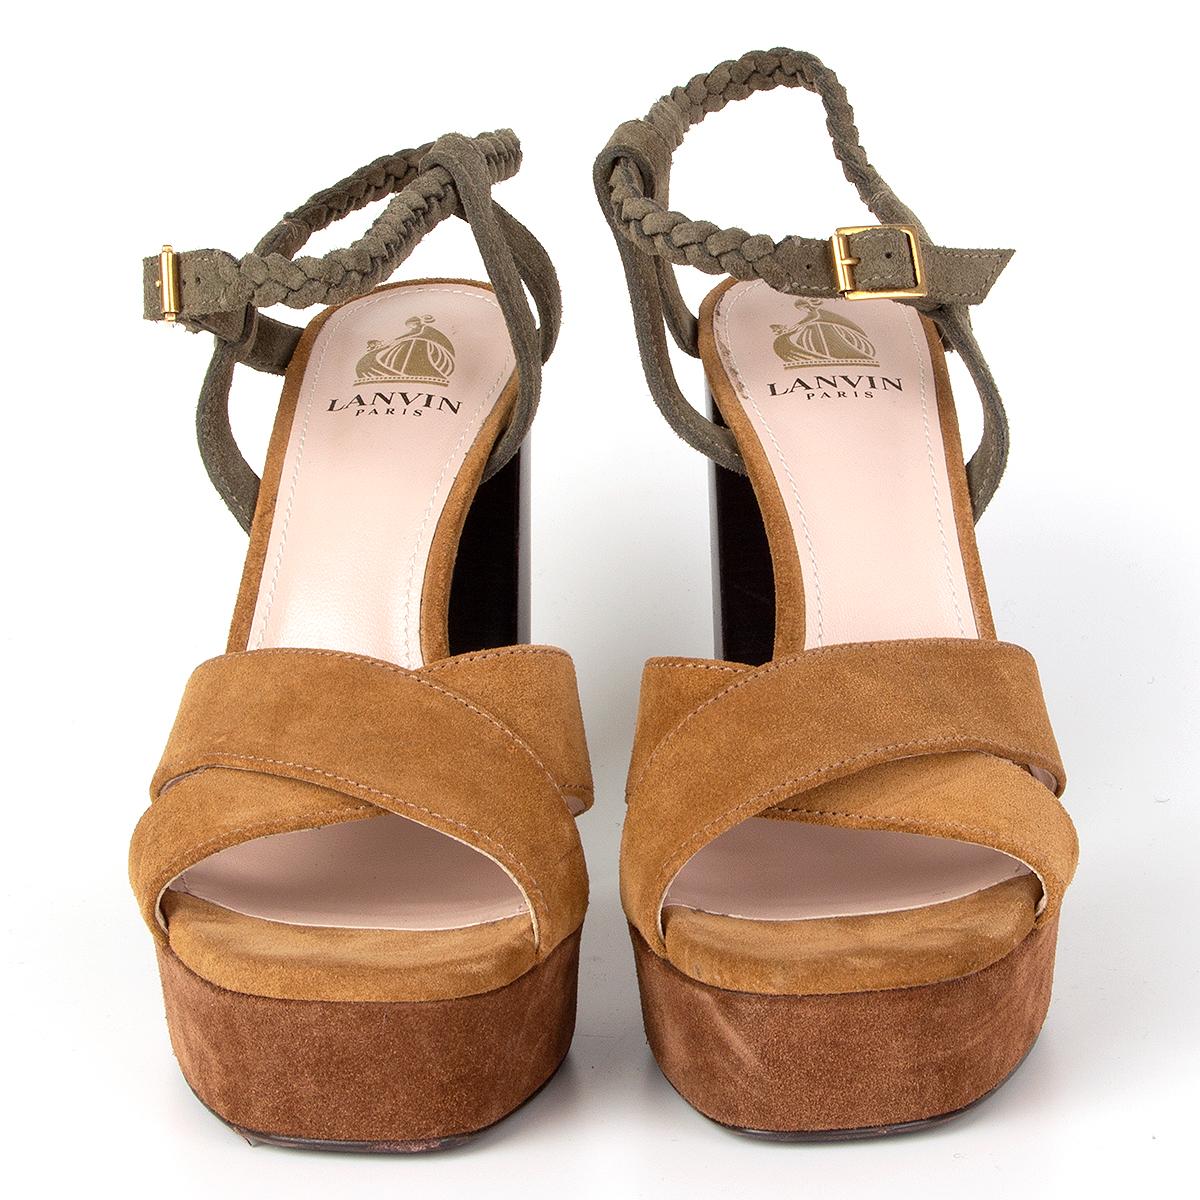 100% authentic Lanvin platform sandals in mustard, brown and olive green suede featuring a dark brown stacked heel. Have been worn and are in excellent condition. 

Measurements
Imprinted Size	39.5
Shoe Size	39.5
Inside Sole	25cm (9.8in)
Width	8cm